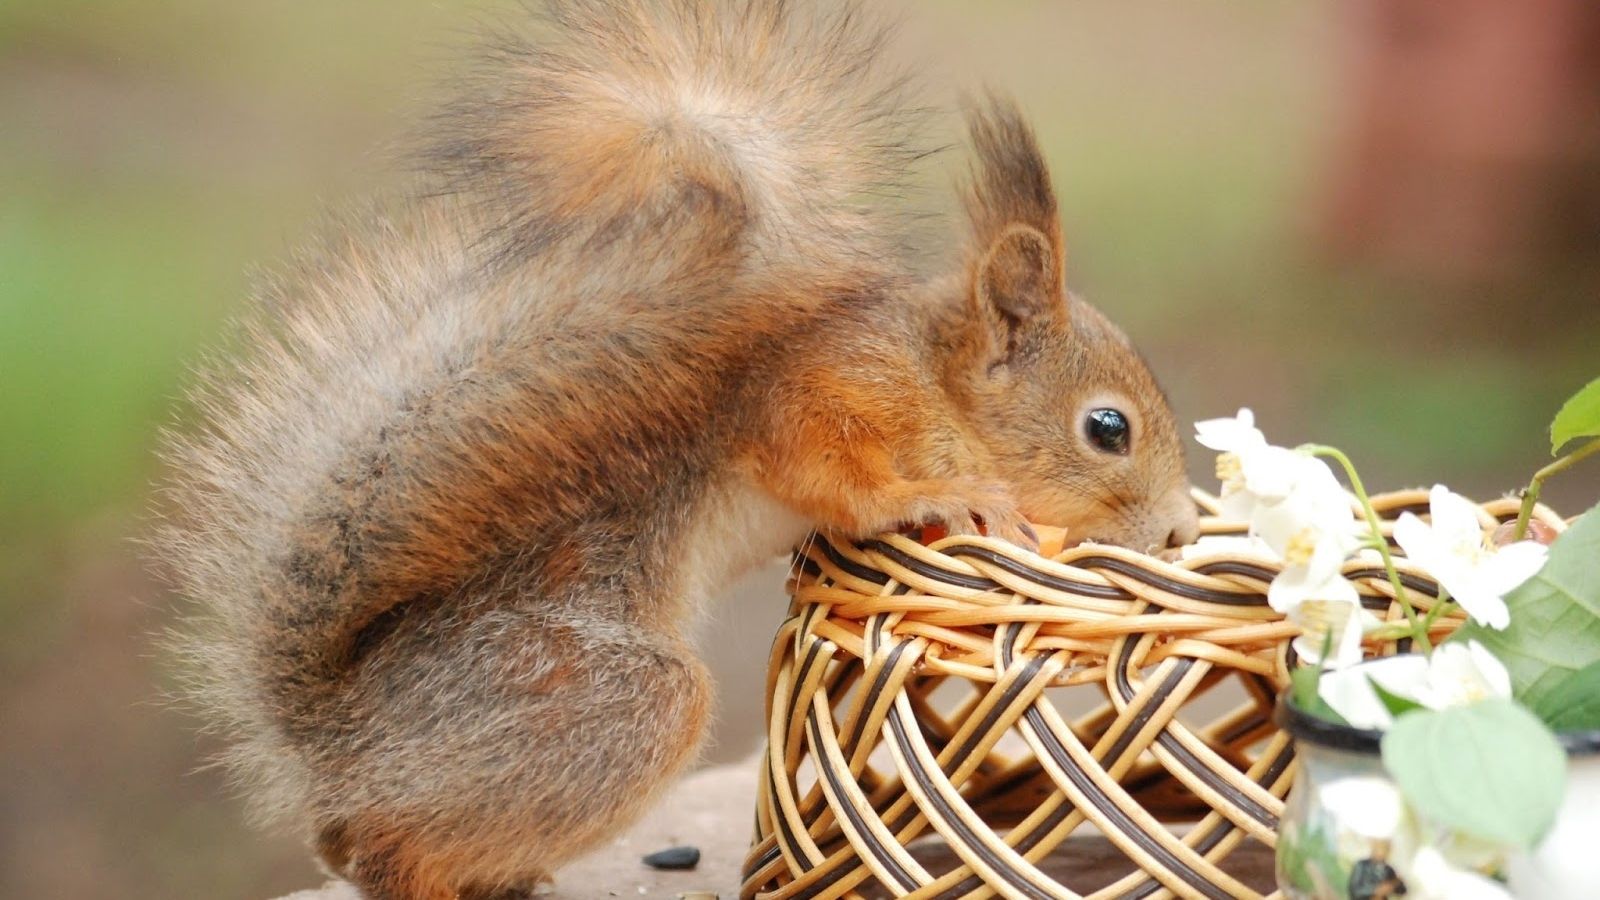 Cute Baby Squirrel Wallpapers